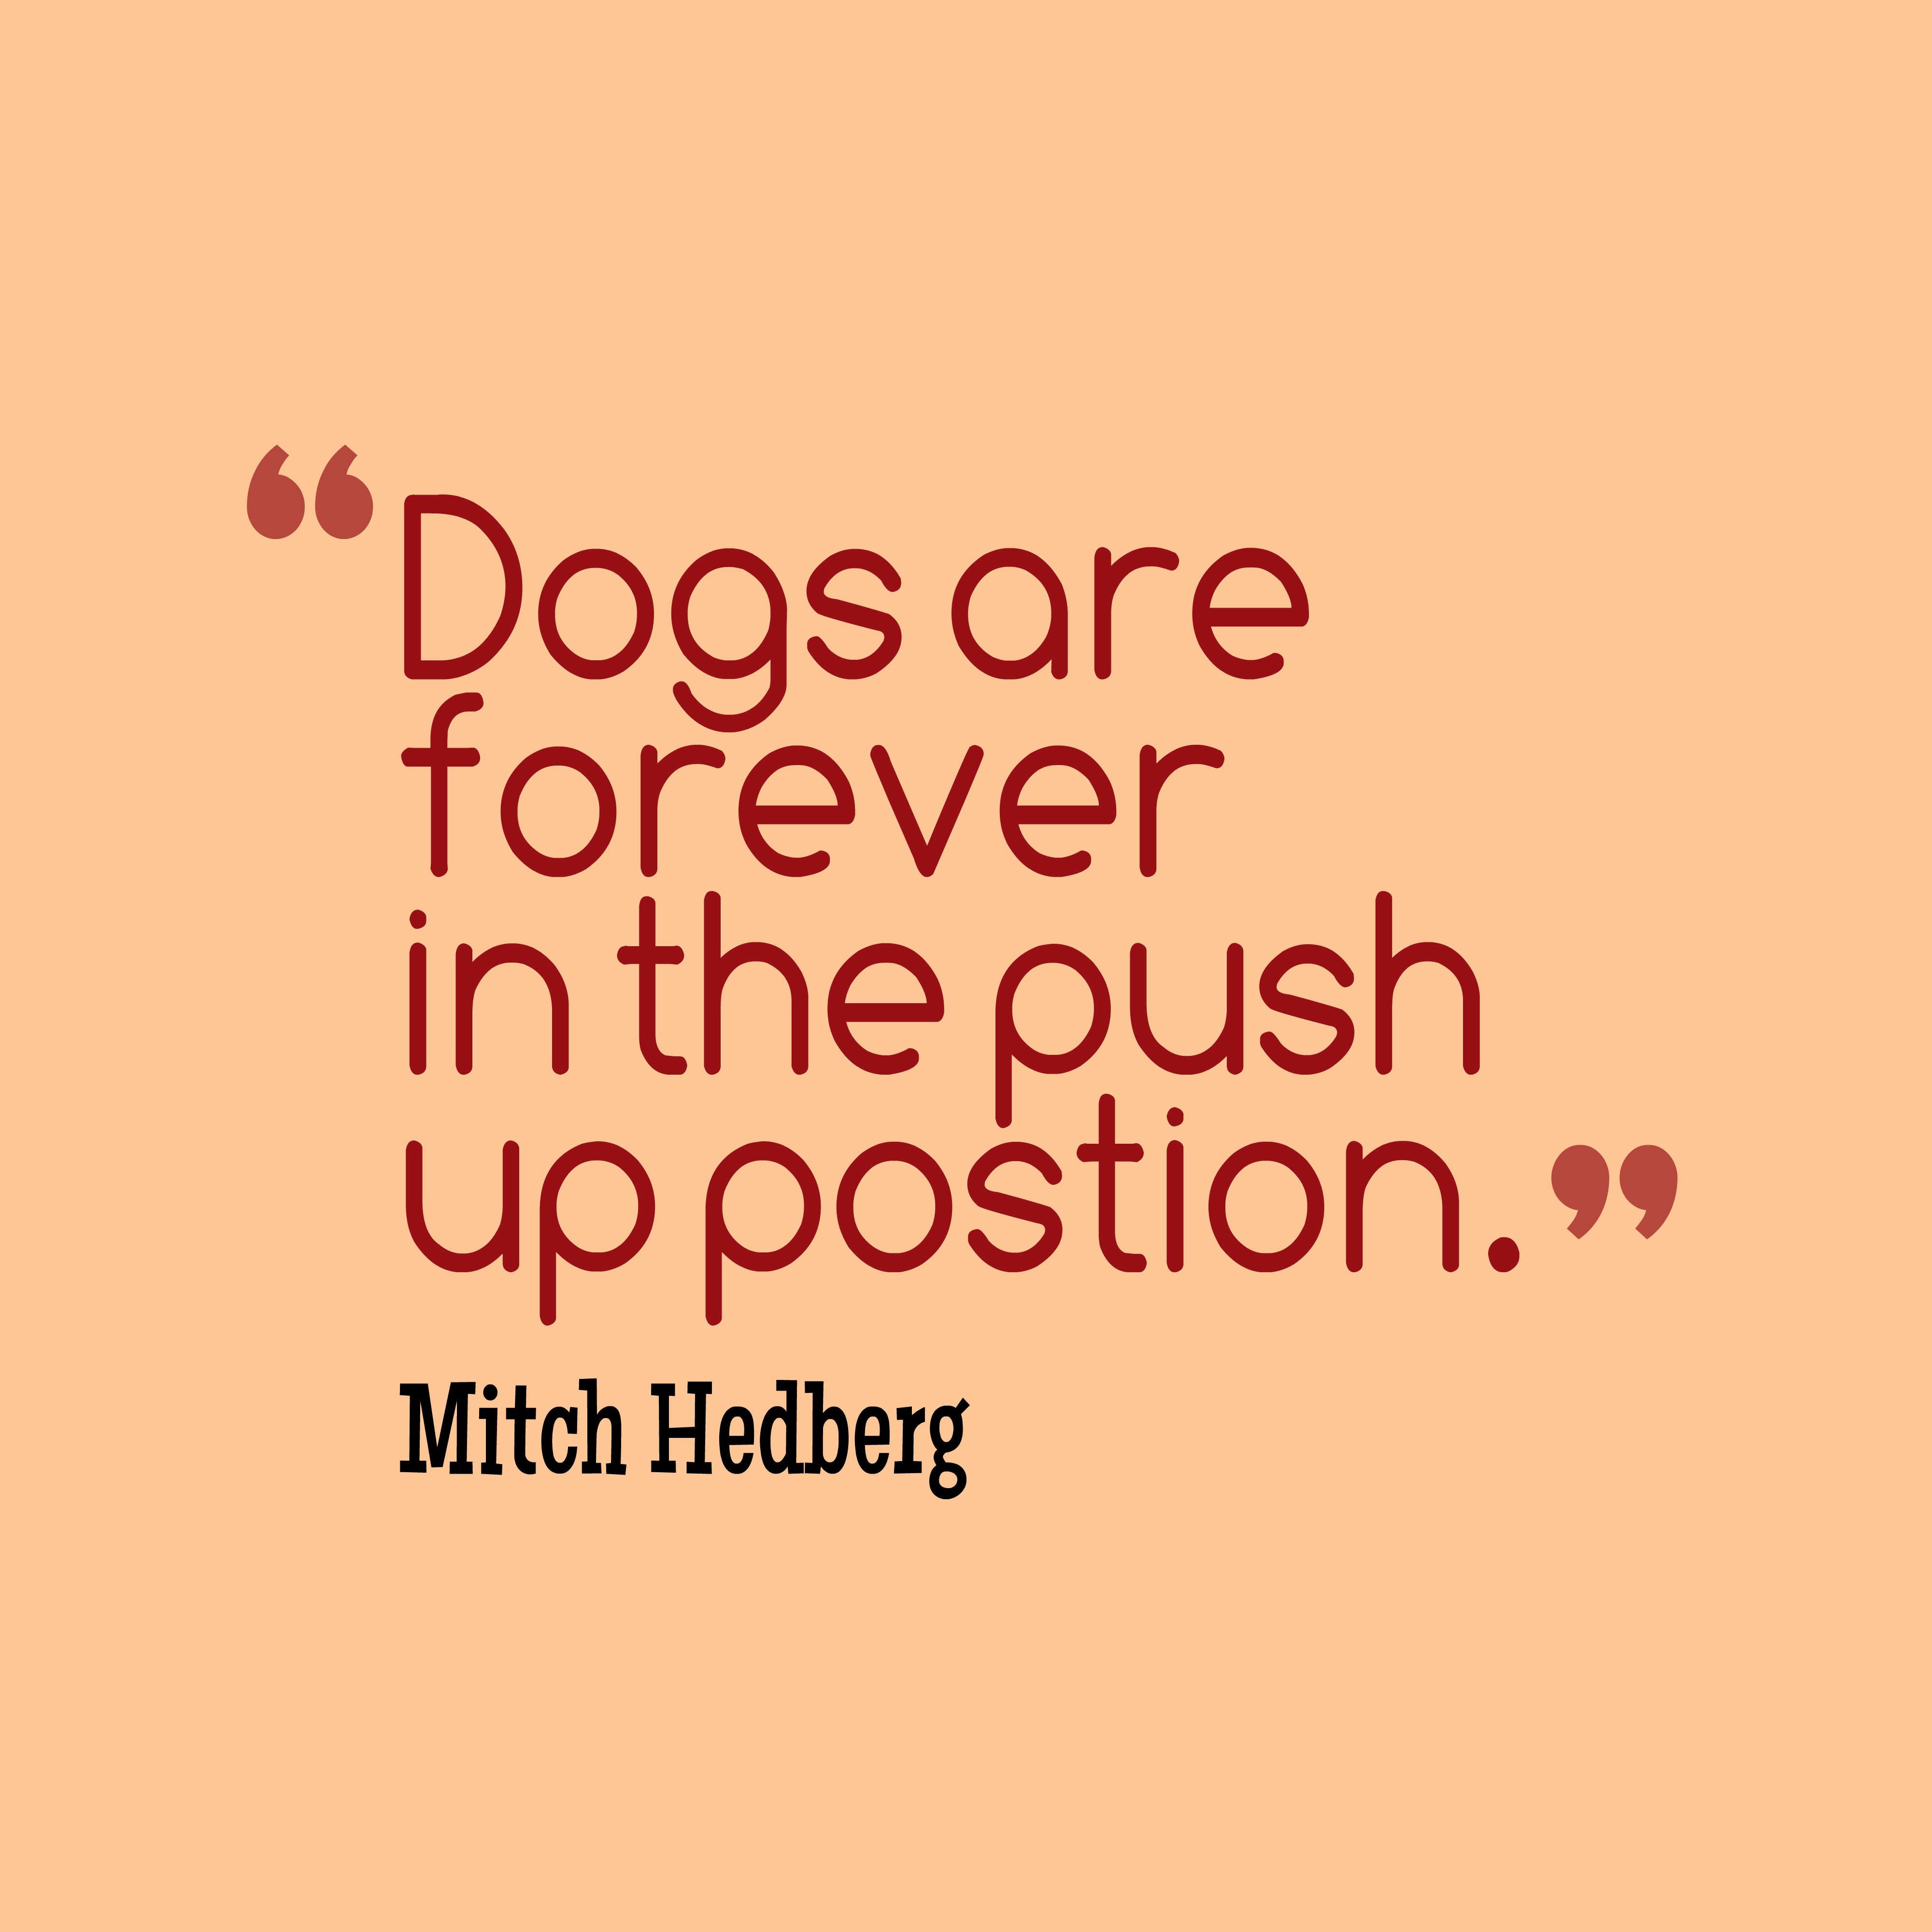 Dogs are forever in the push up postion. Mitch Hedberg